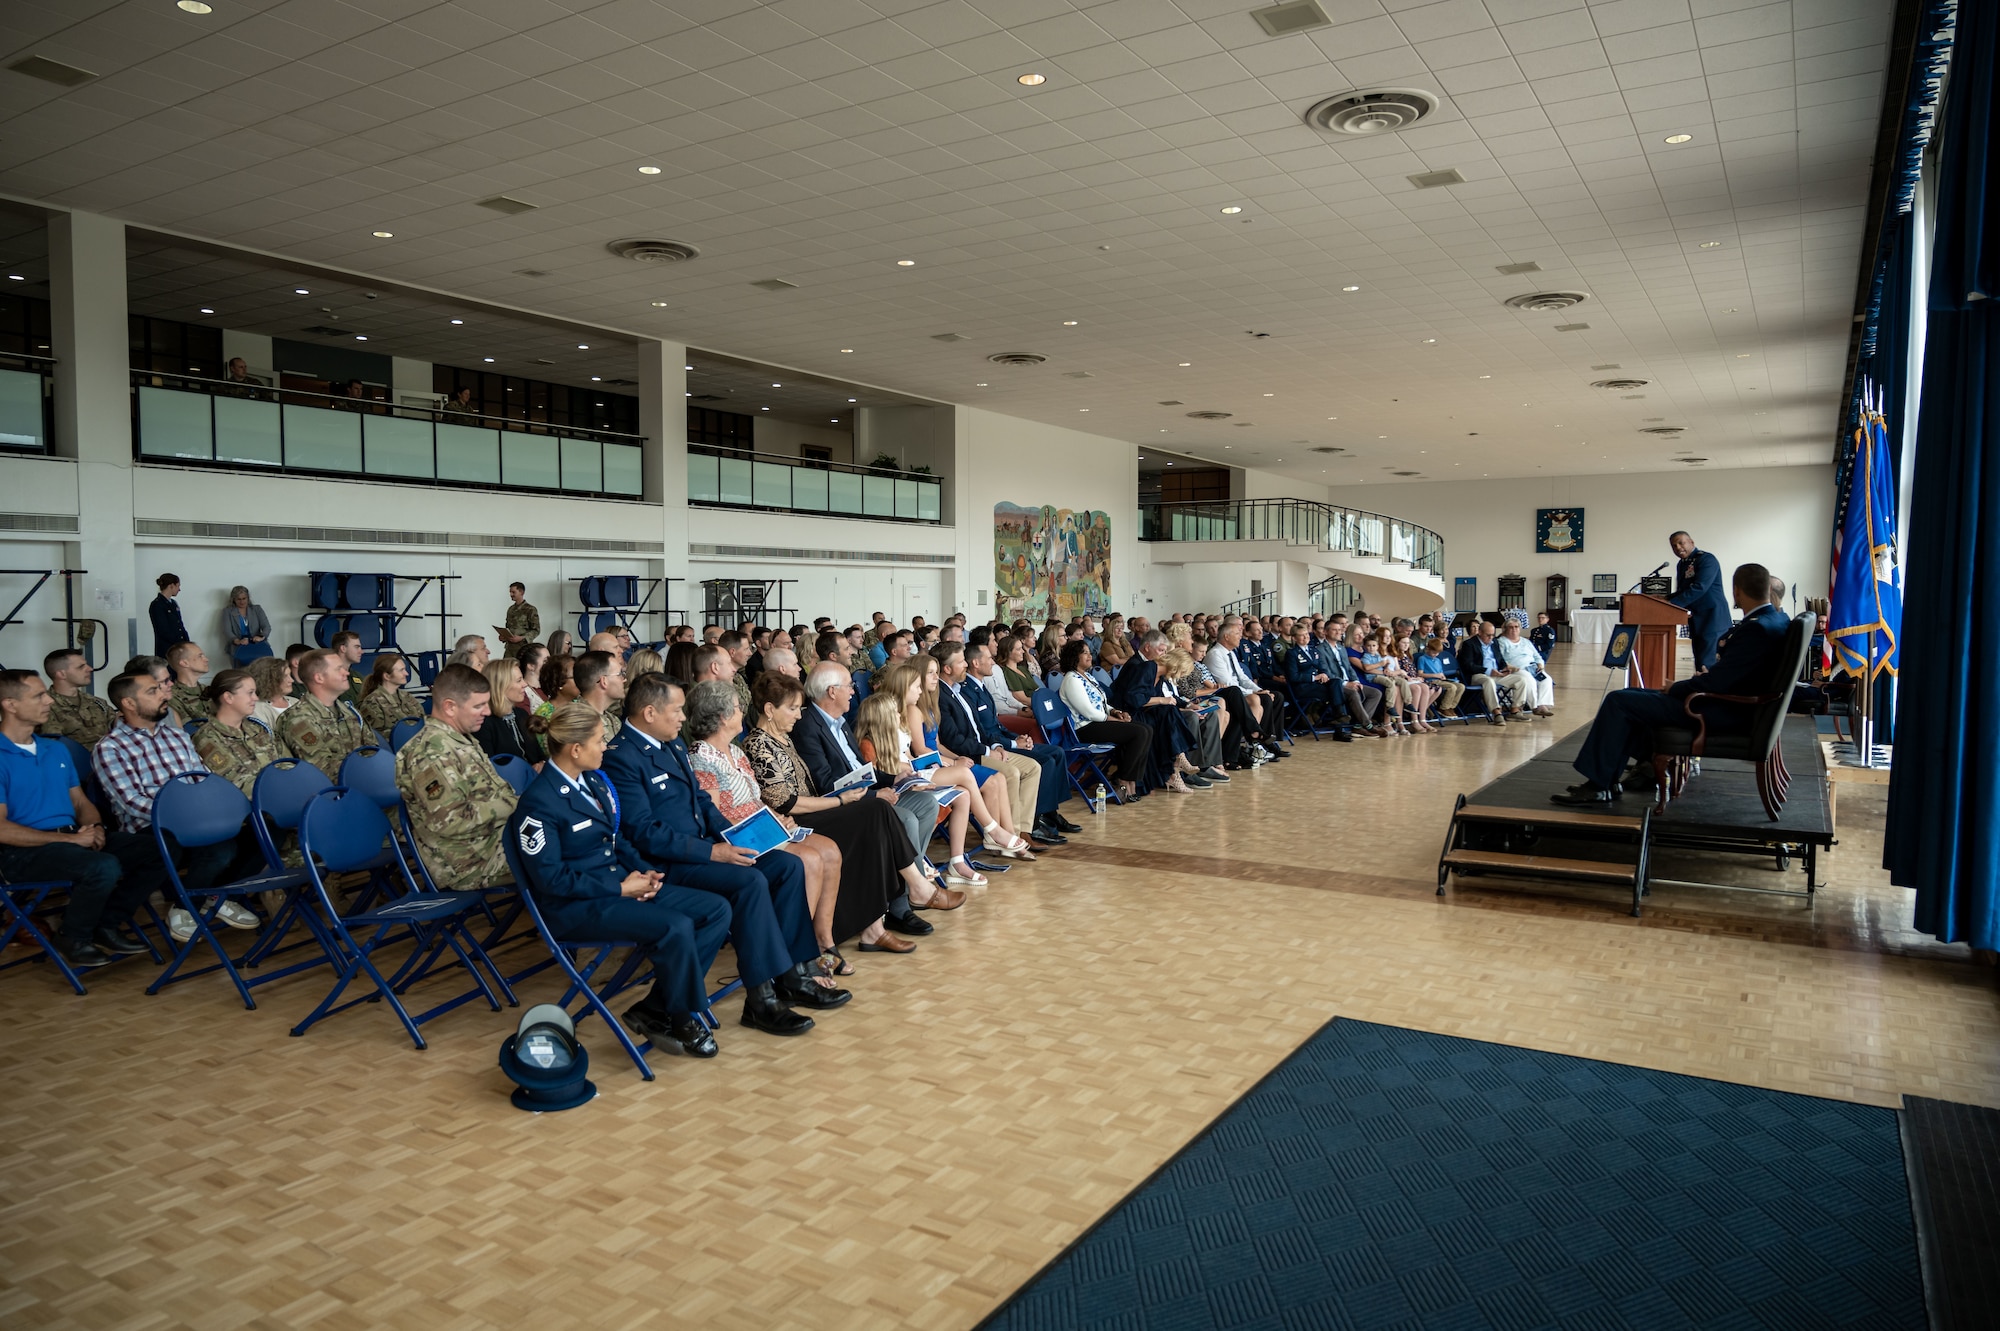 A crowd gathers in the Arnold Hall Ballroom at the U.S. Air Force Academy, Colorado, and listens to Lieutenant General Richard Clark, Academy superintendent deliver remarks during a Permanent Professor Investiture ceremony on August 19th 2022.